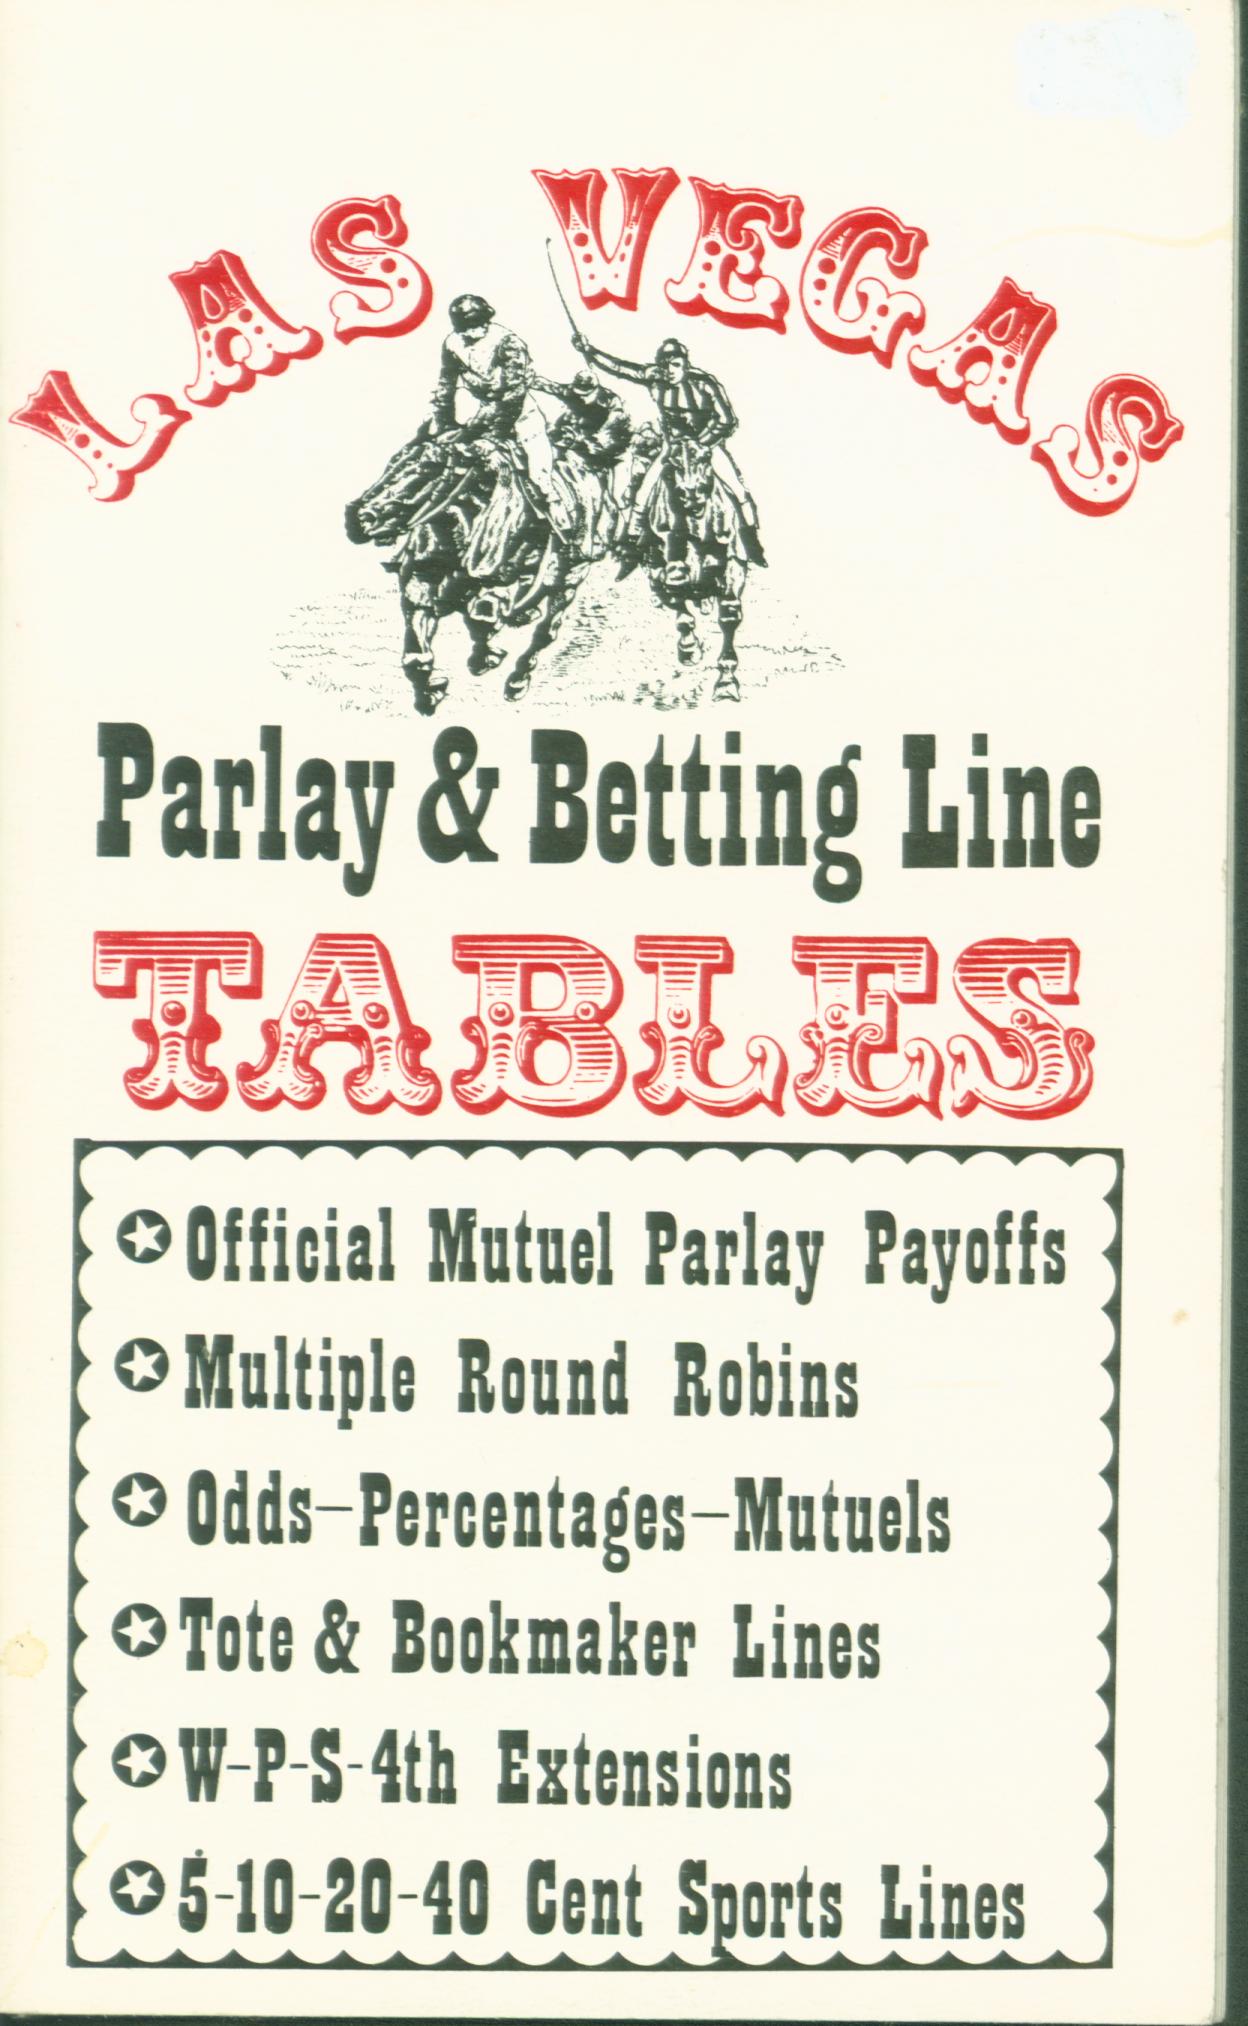 LAS VEGAGS PARLAY & BETTING LINE TABLES. 